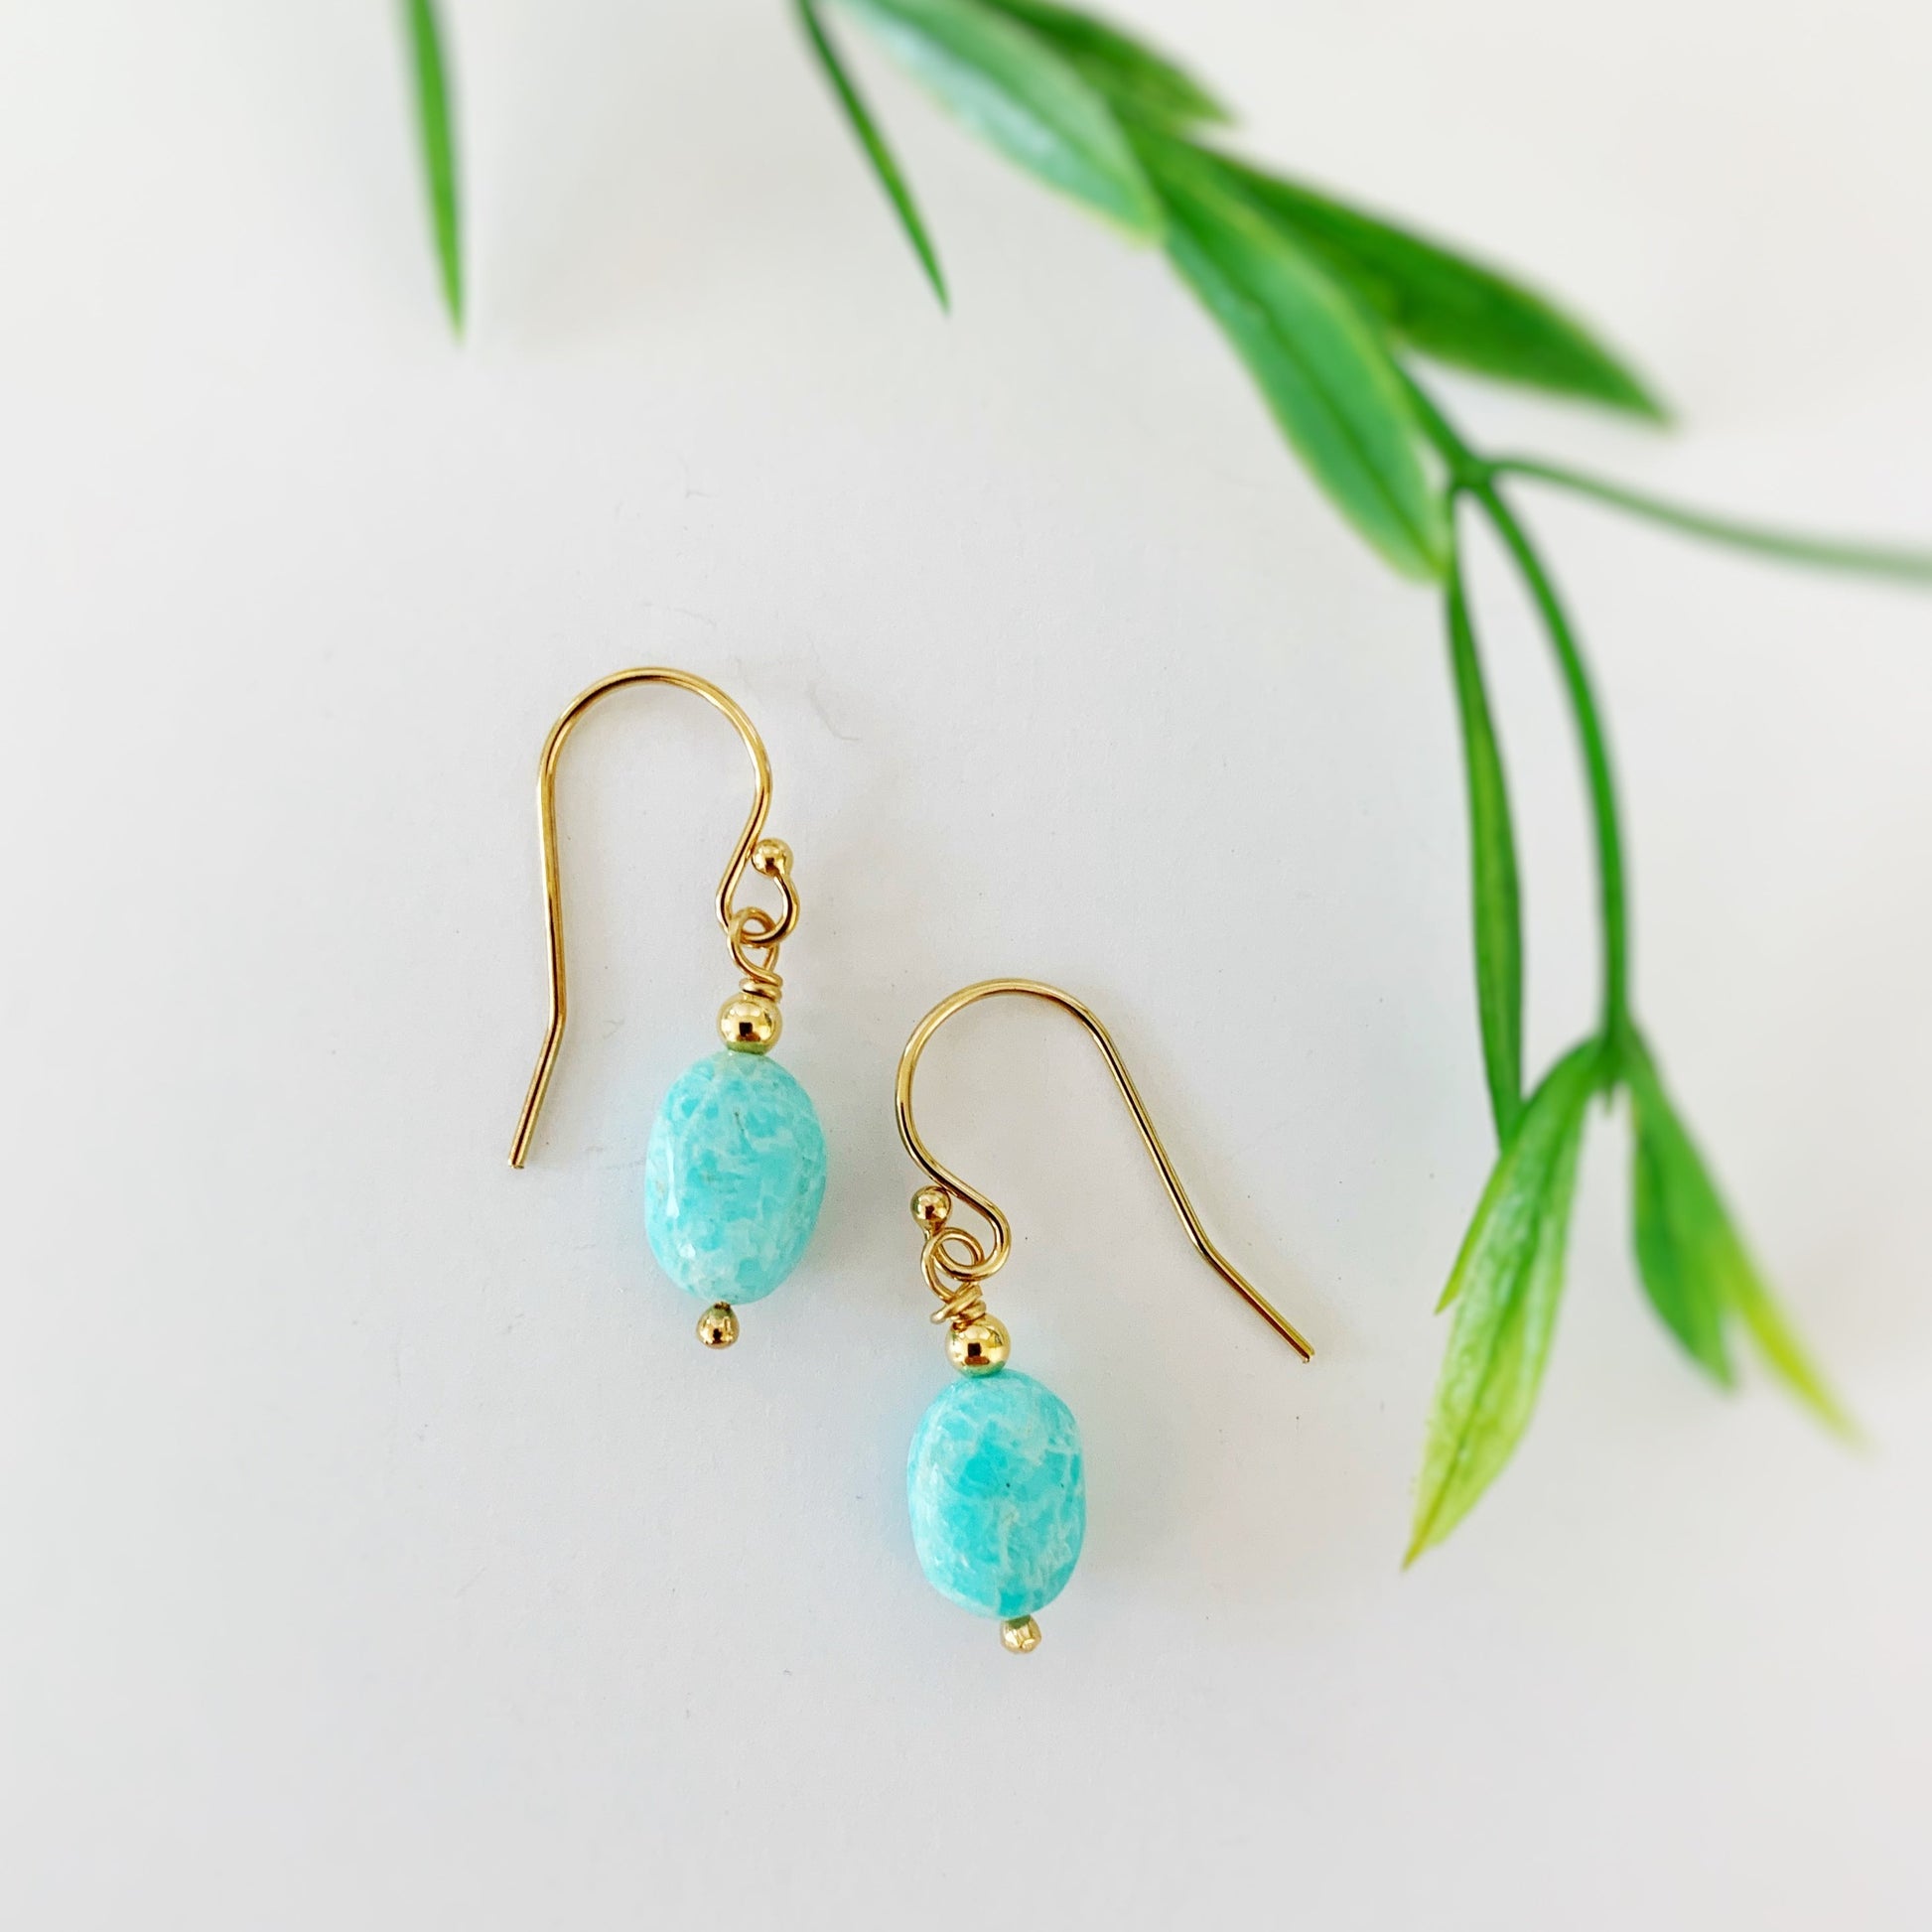 A picture of the laguna earrings in 14k gold filled. The laguna earrings are created with 14k gold filled beads and findings and bright aqua oval shaped amazonite beads. This pair is photographed on a white background with blurred greenery on the right side of the picture